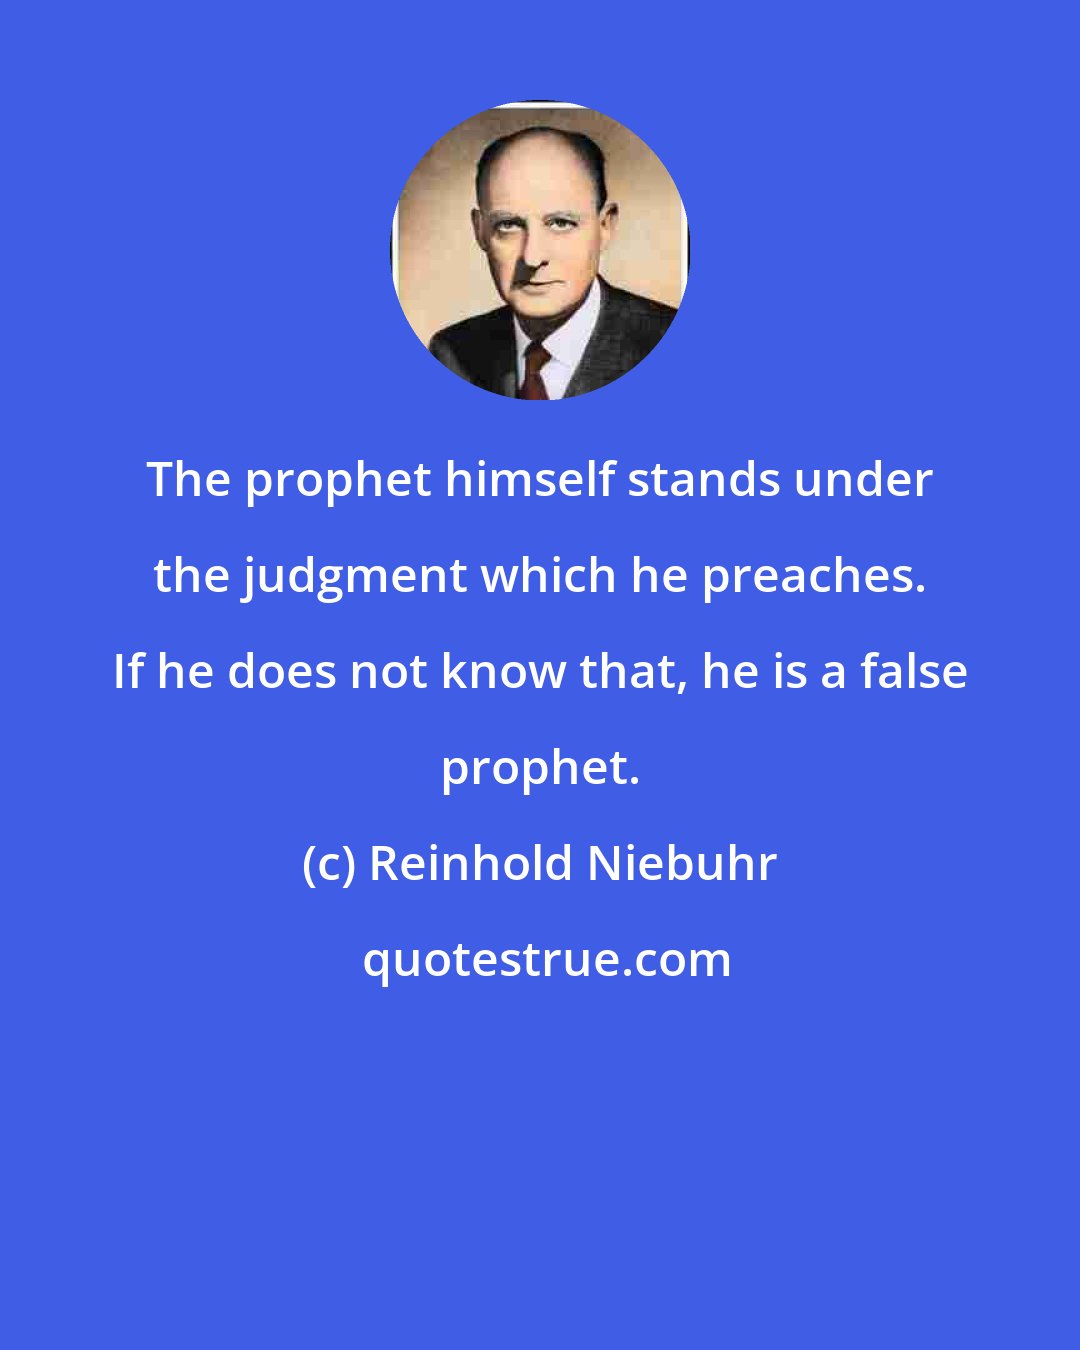 Reinhold Niebuhr: The prophet himself stands under the judgment which he preaches. If he does not know that, he is a false prophet.